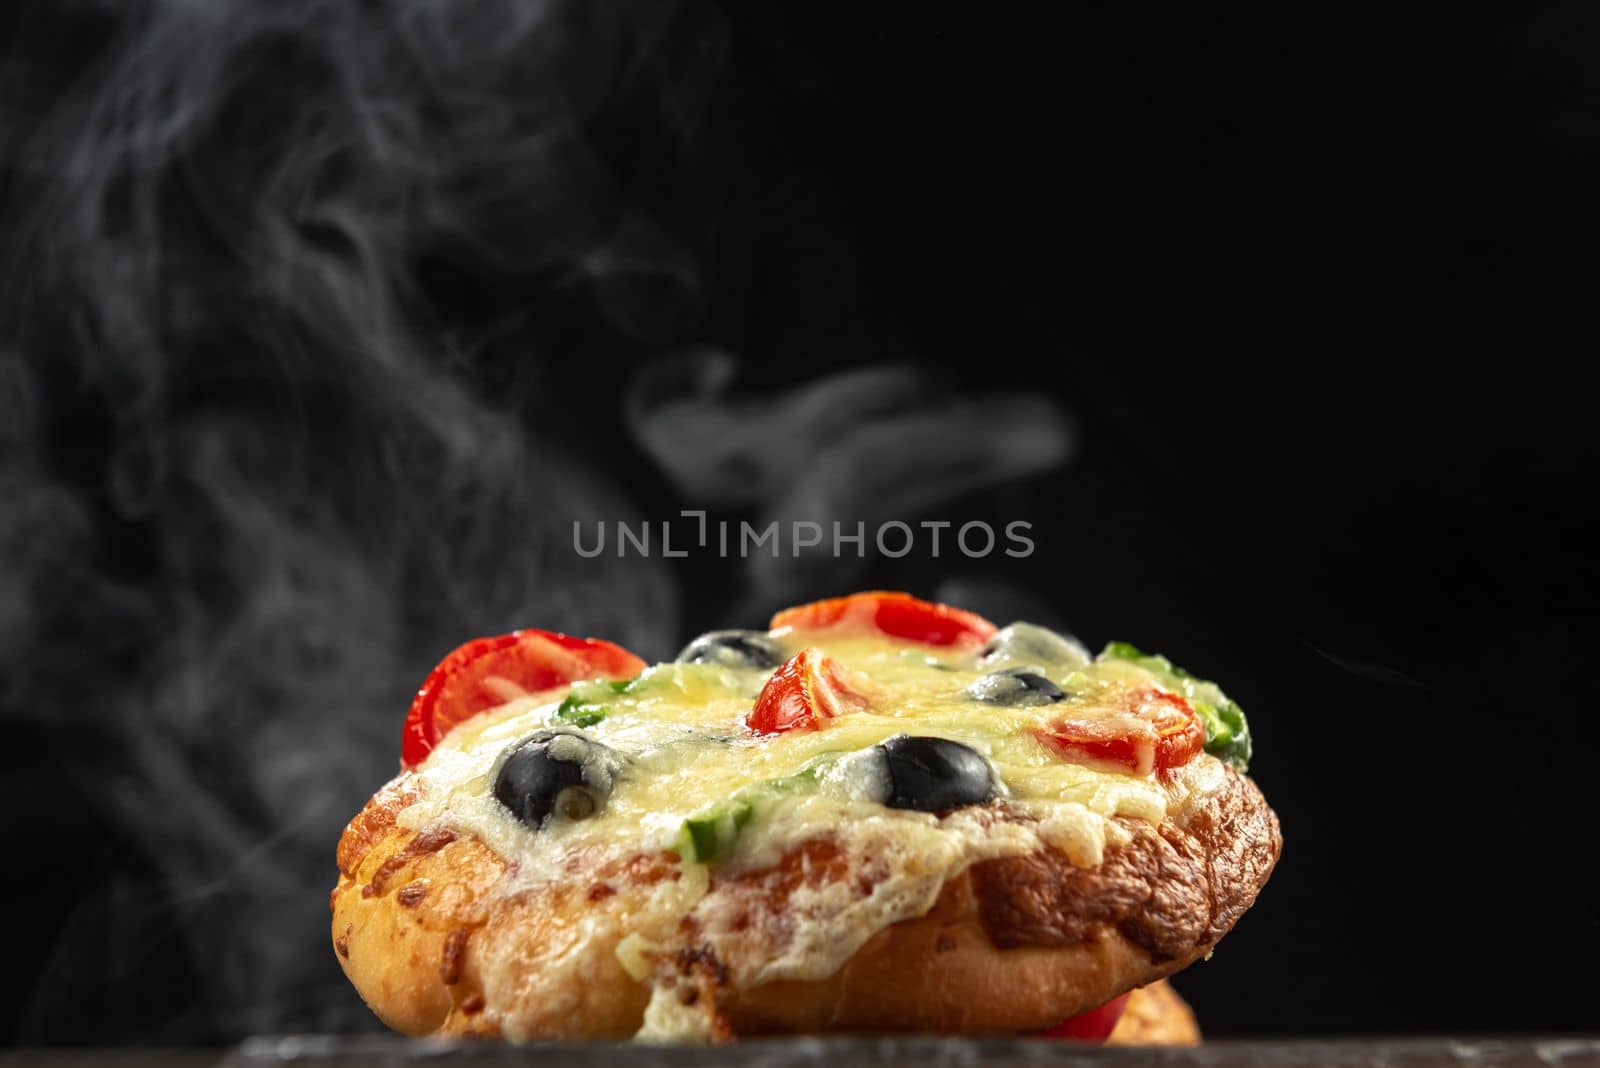 Indian hot pizza goes steaming. Homemade Indian pizza on small tortillas on a black background. Indian pizza on tortillas. Modern Indian culture in food. by gulyaevstudio